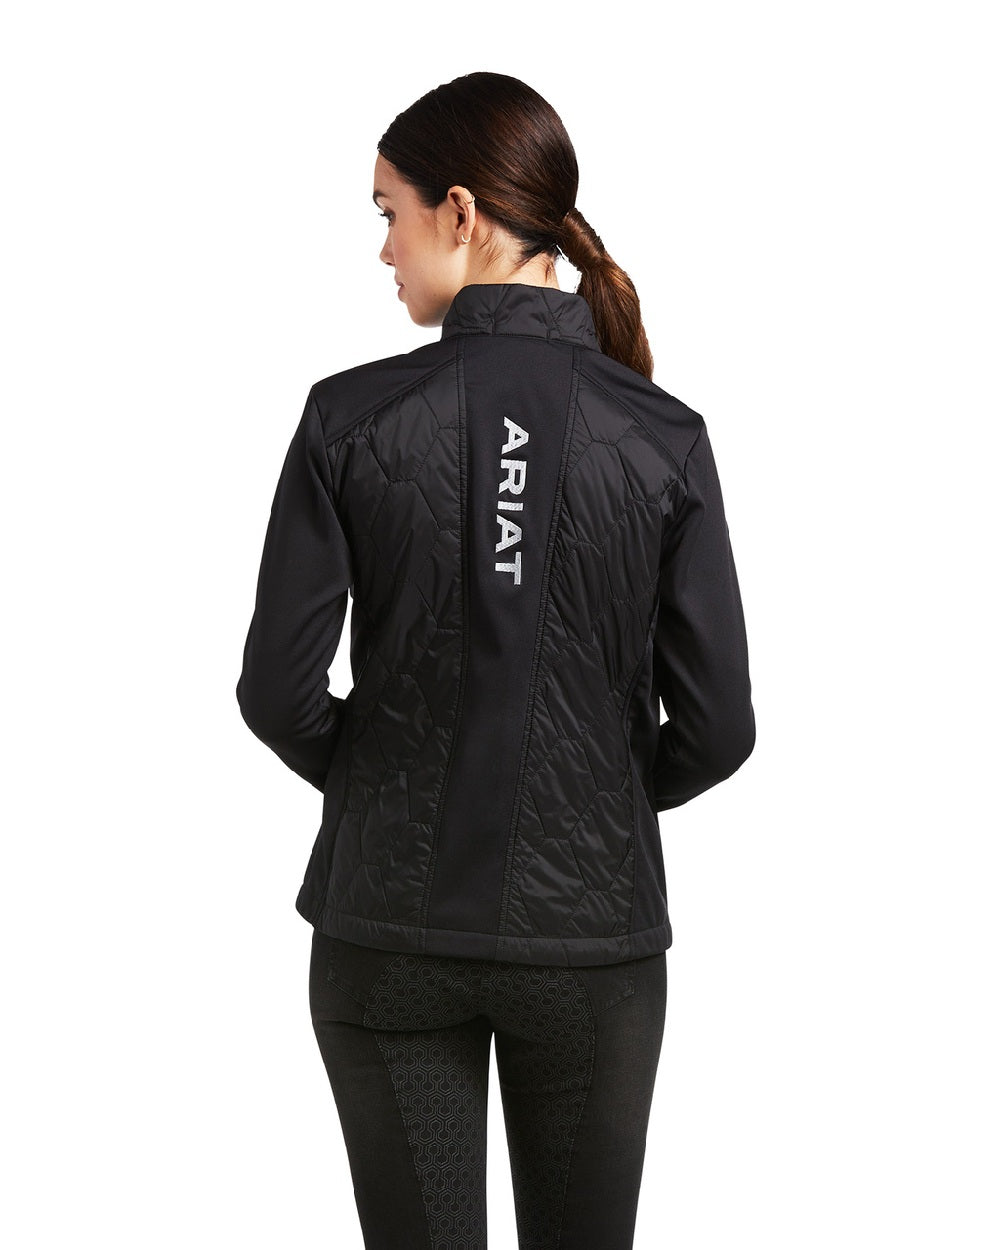 Ariat Womens Fusion Insulated Jacket in Black 